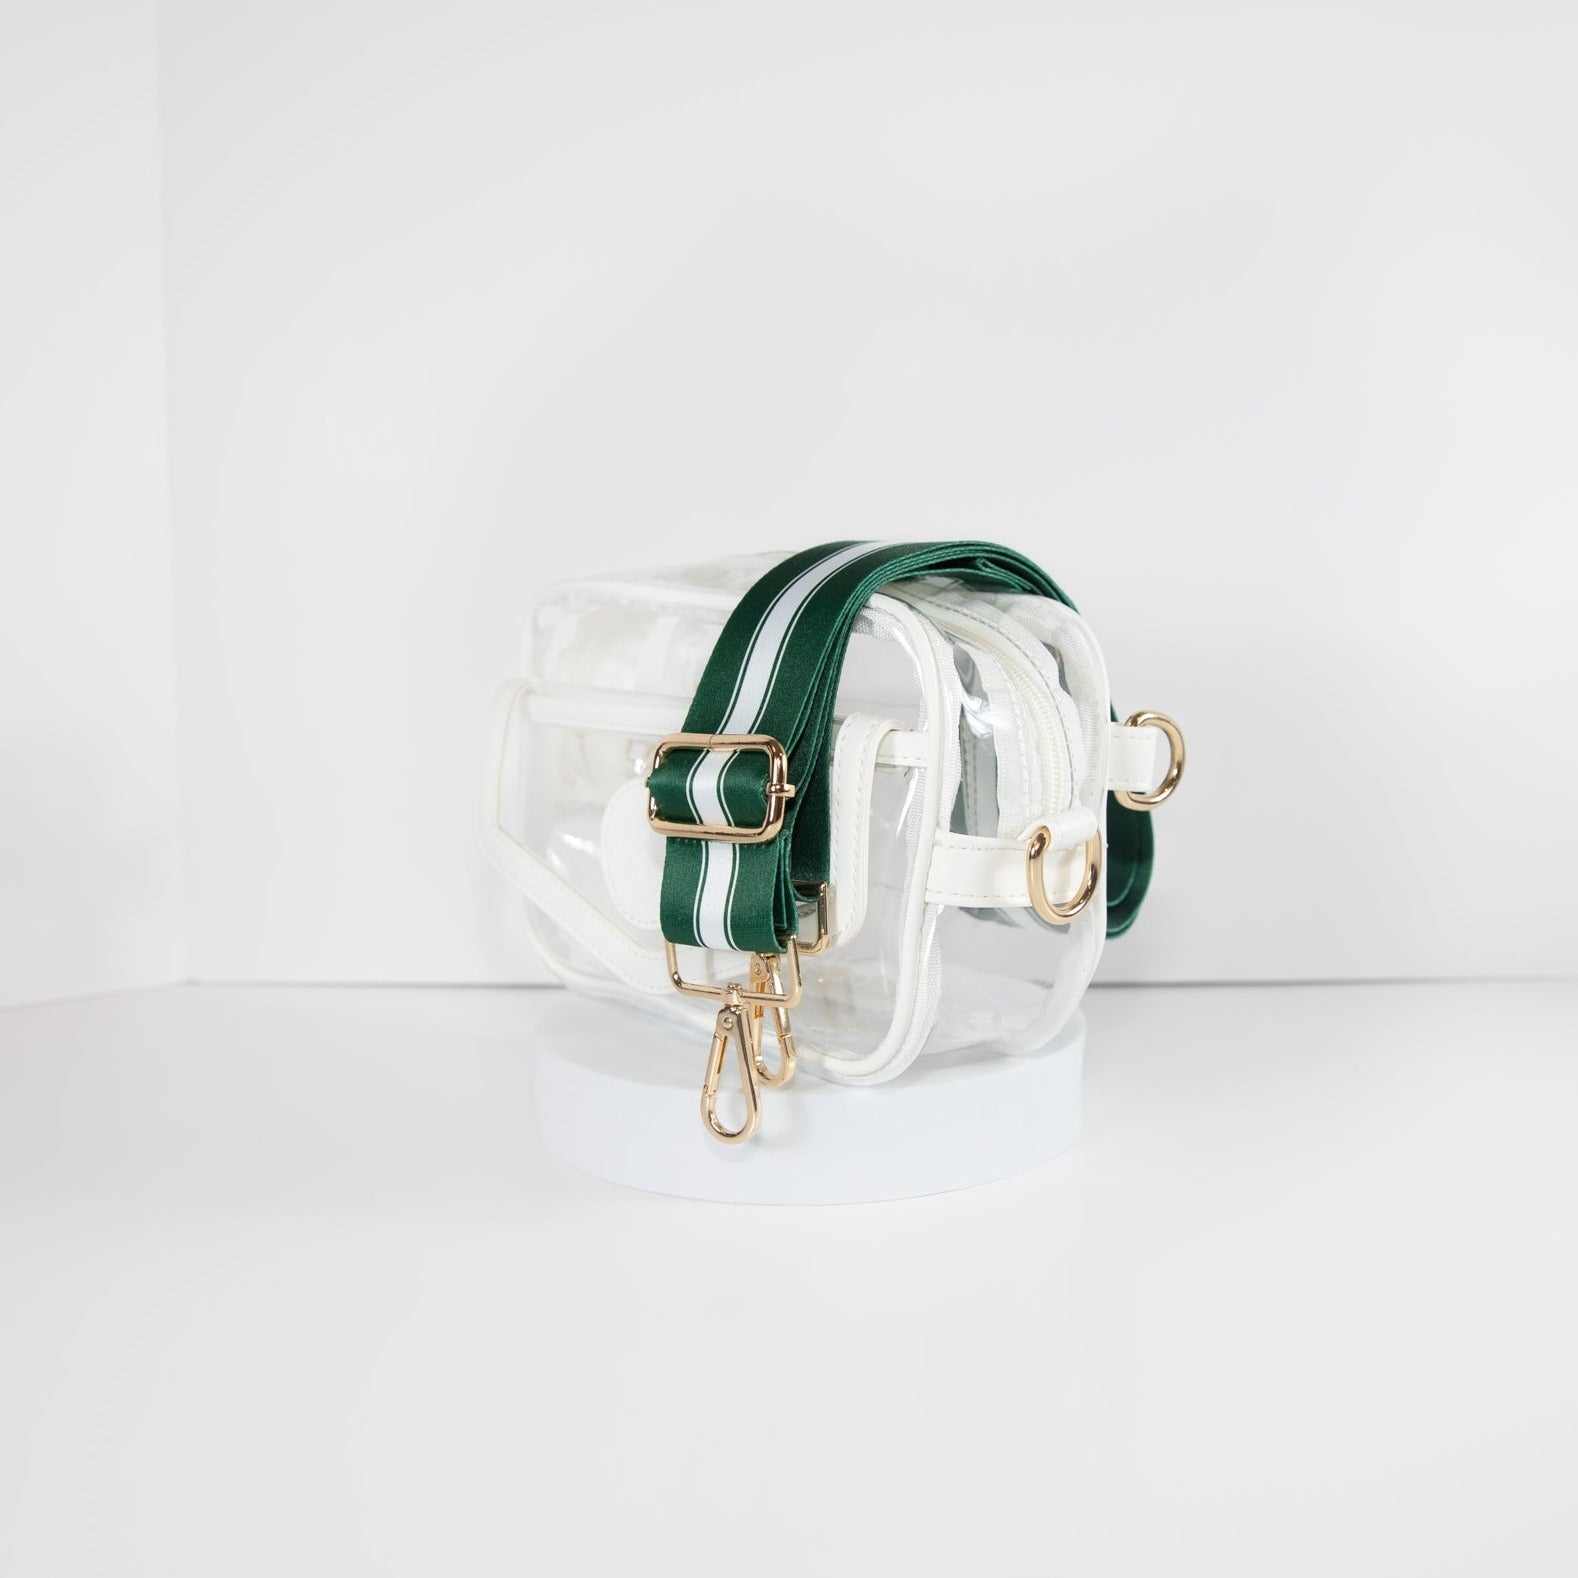 Clear Stadium Bag in white leather trim, side facing, with a crossbody strap in New York Jets team colors.